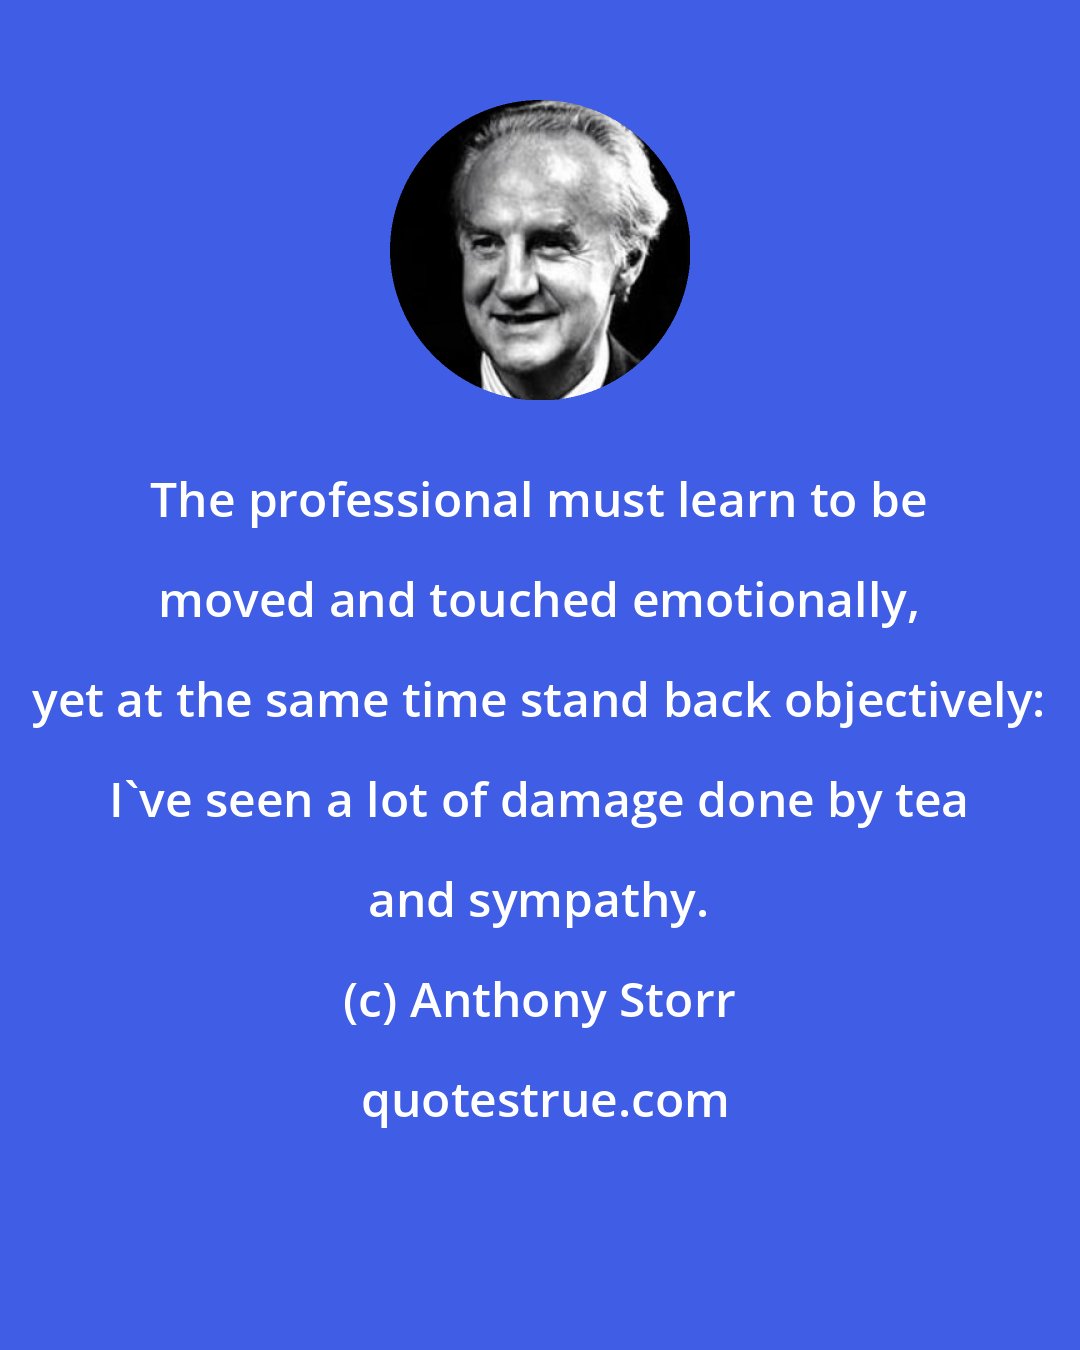 Anthony Storr: The professional must learn to be moved and touched emotionally, yet at the same time stand back objectively: I've seen a lot of damage done by tea and sympathy.